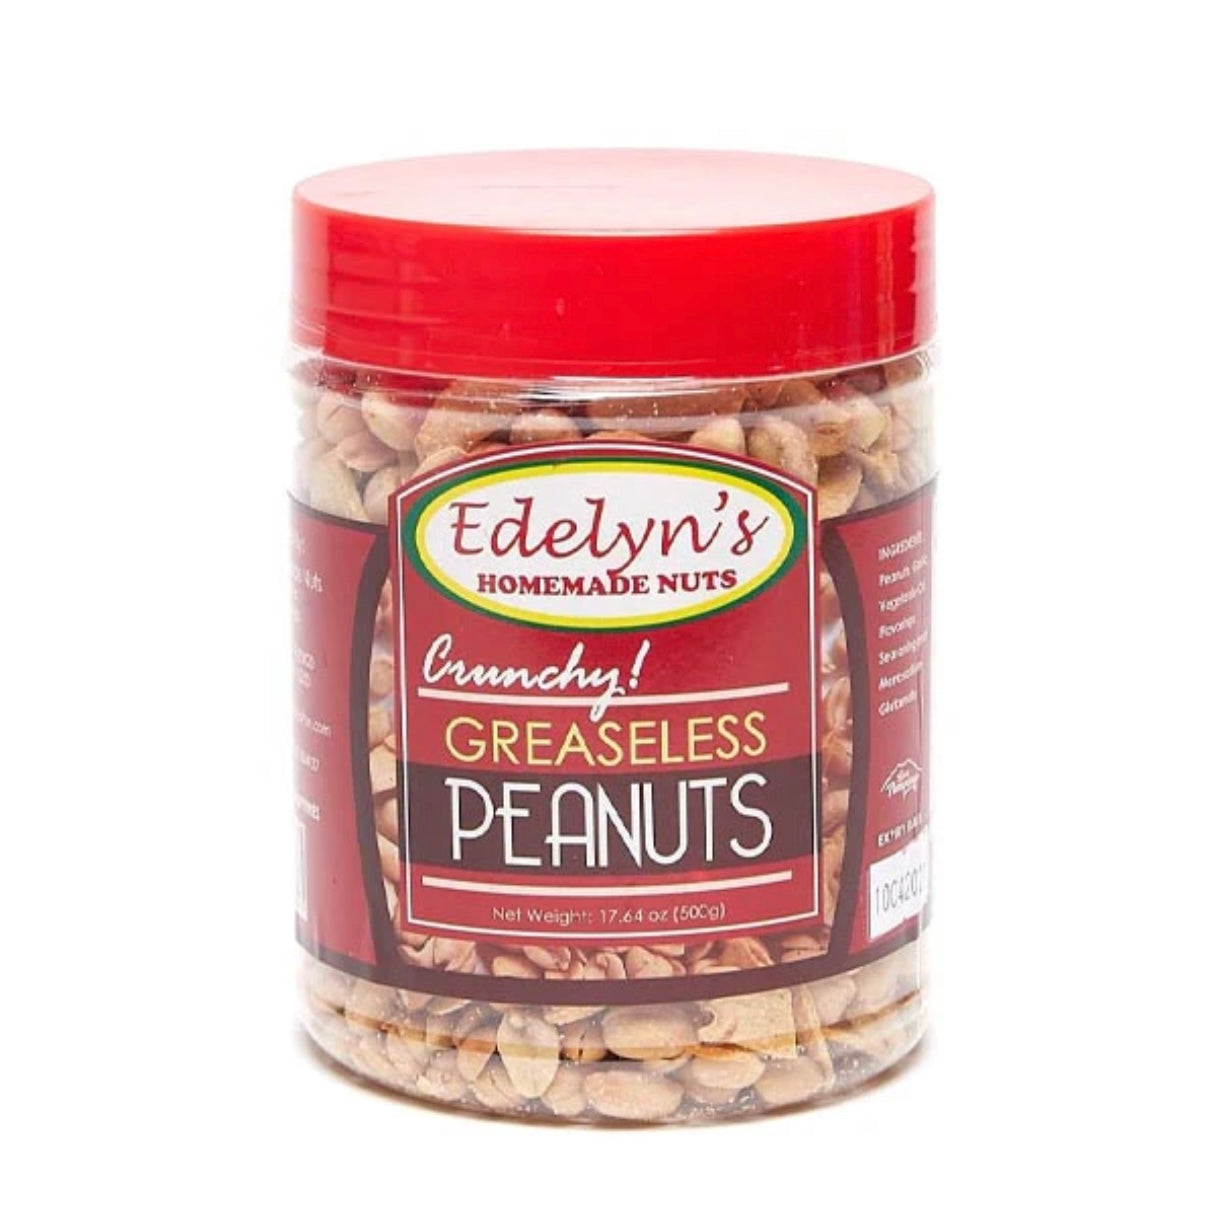 500g Edelyn's Homemade Nuts Crunchy Greaseless Peanuts